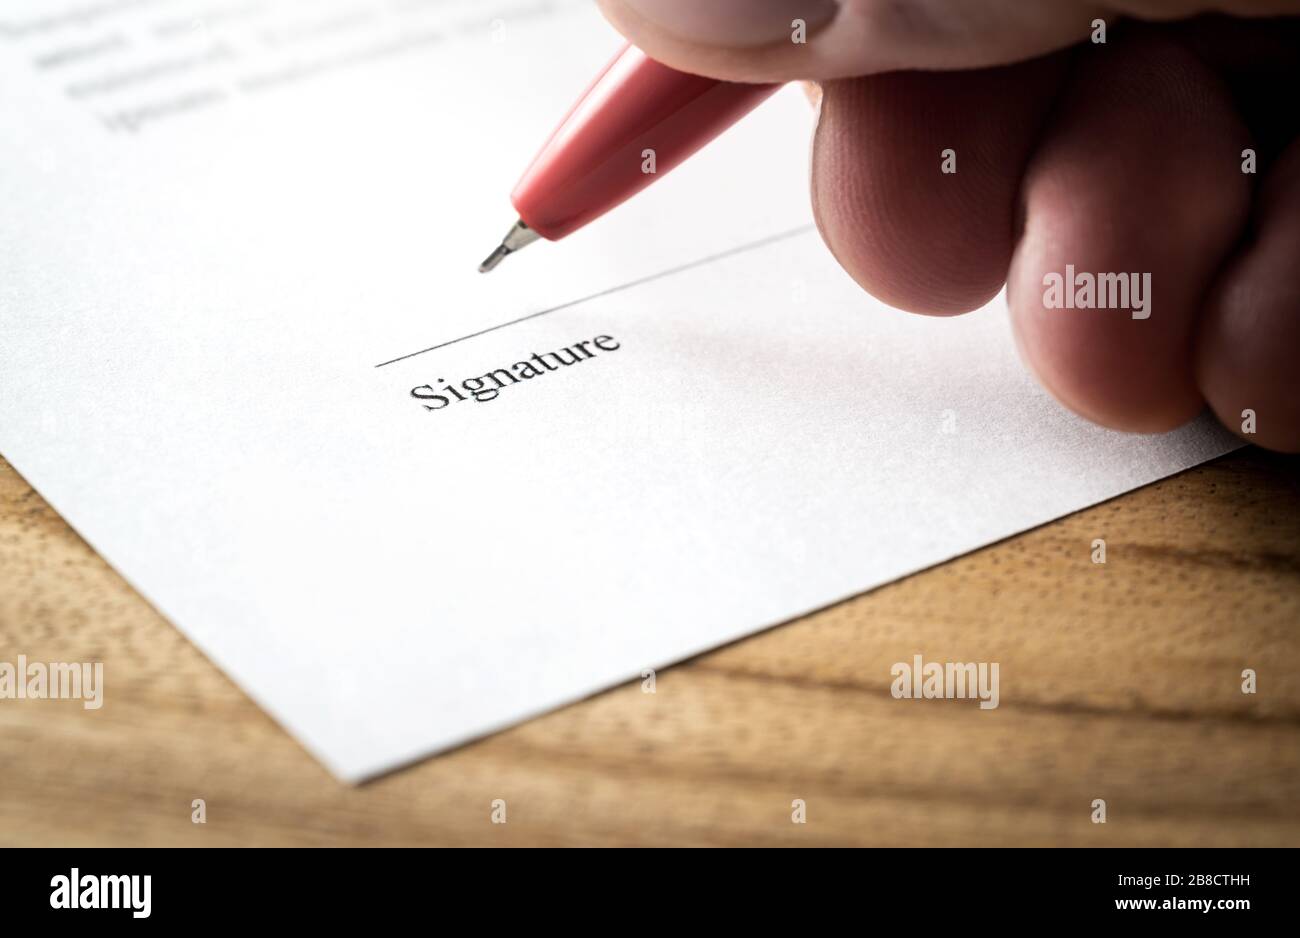 Writing signature. Man signing settlement, contract or agreement for employment and hiring, business acquisition and buyout, car lease or real estate. Stock Photo